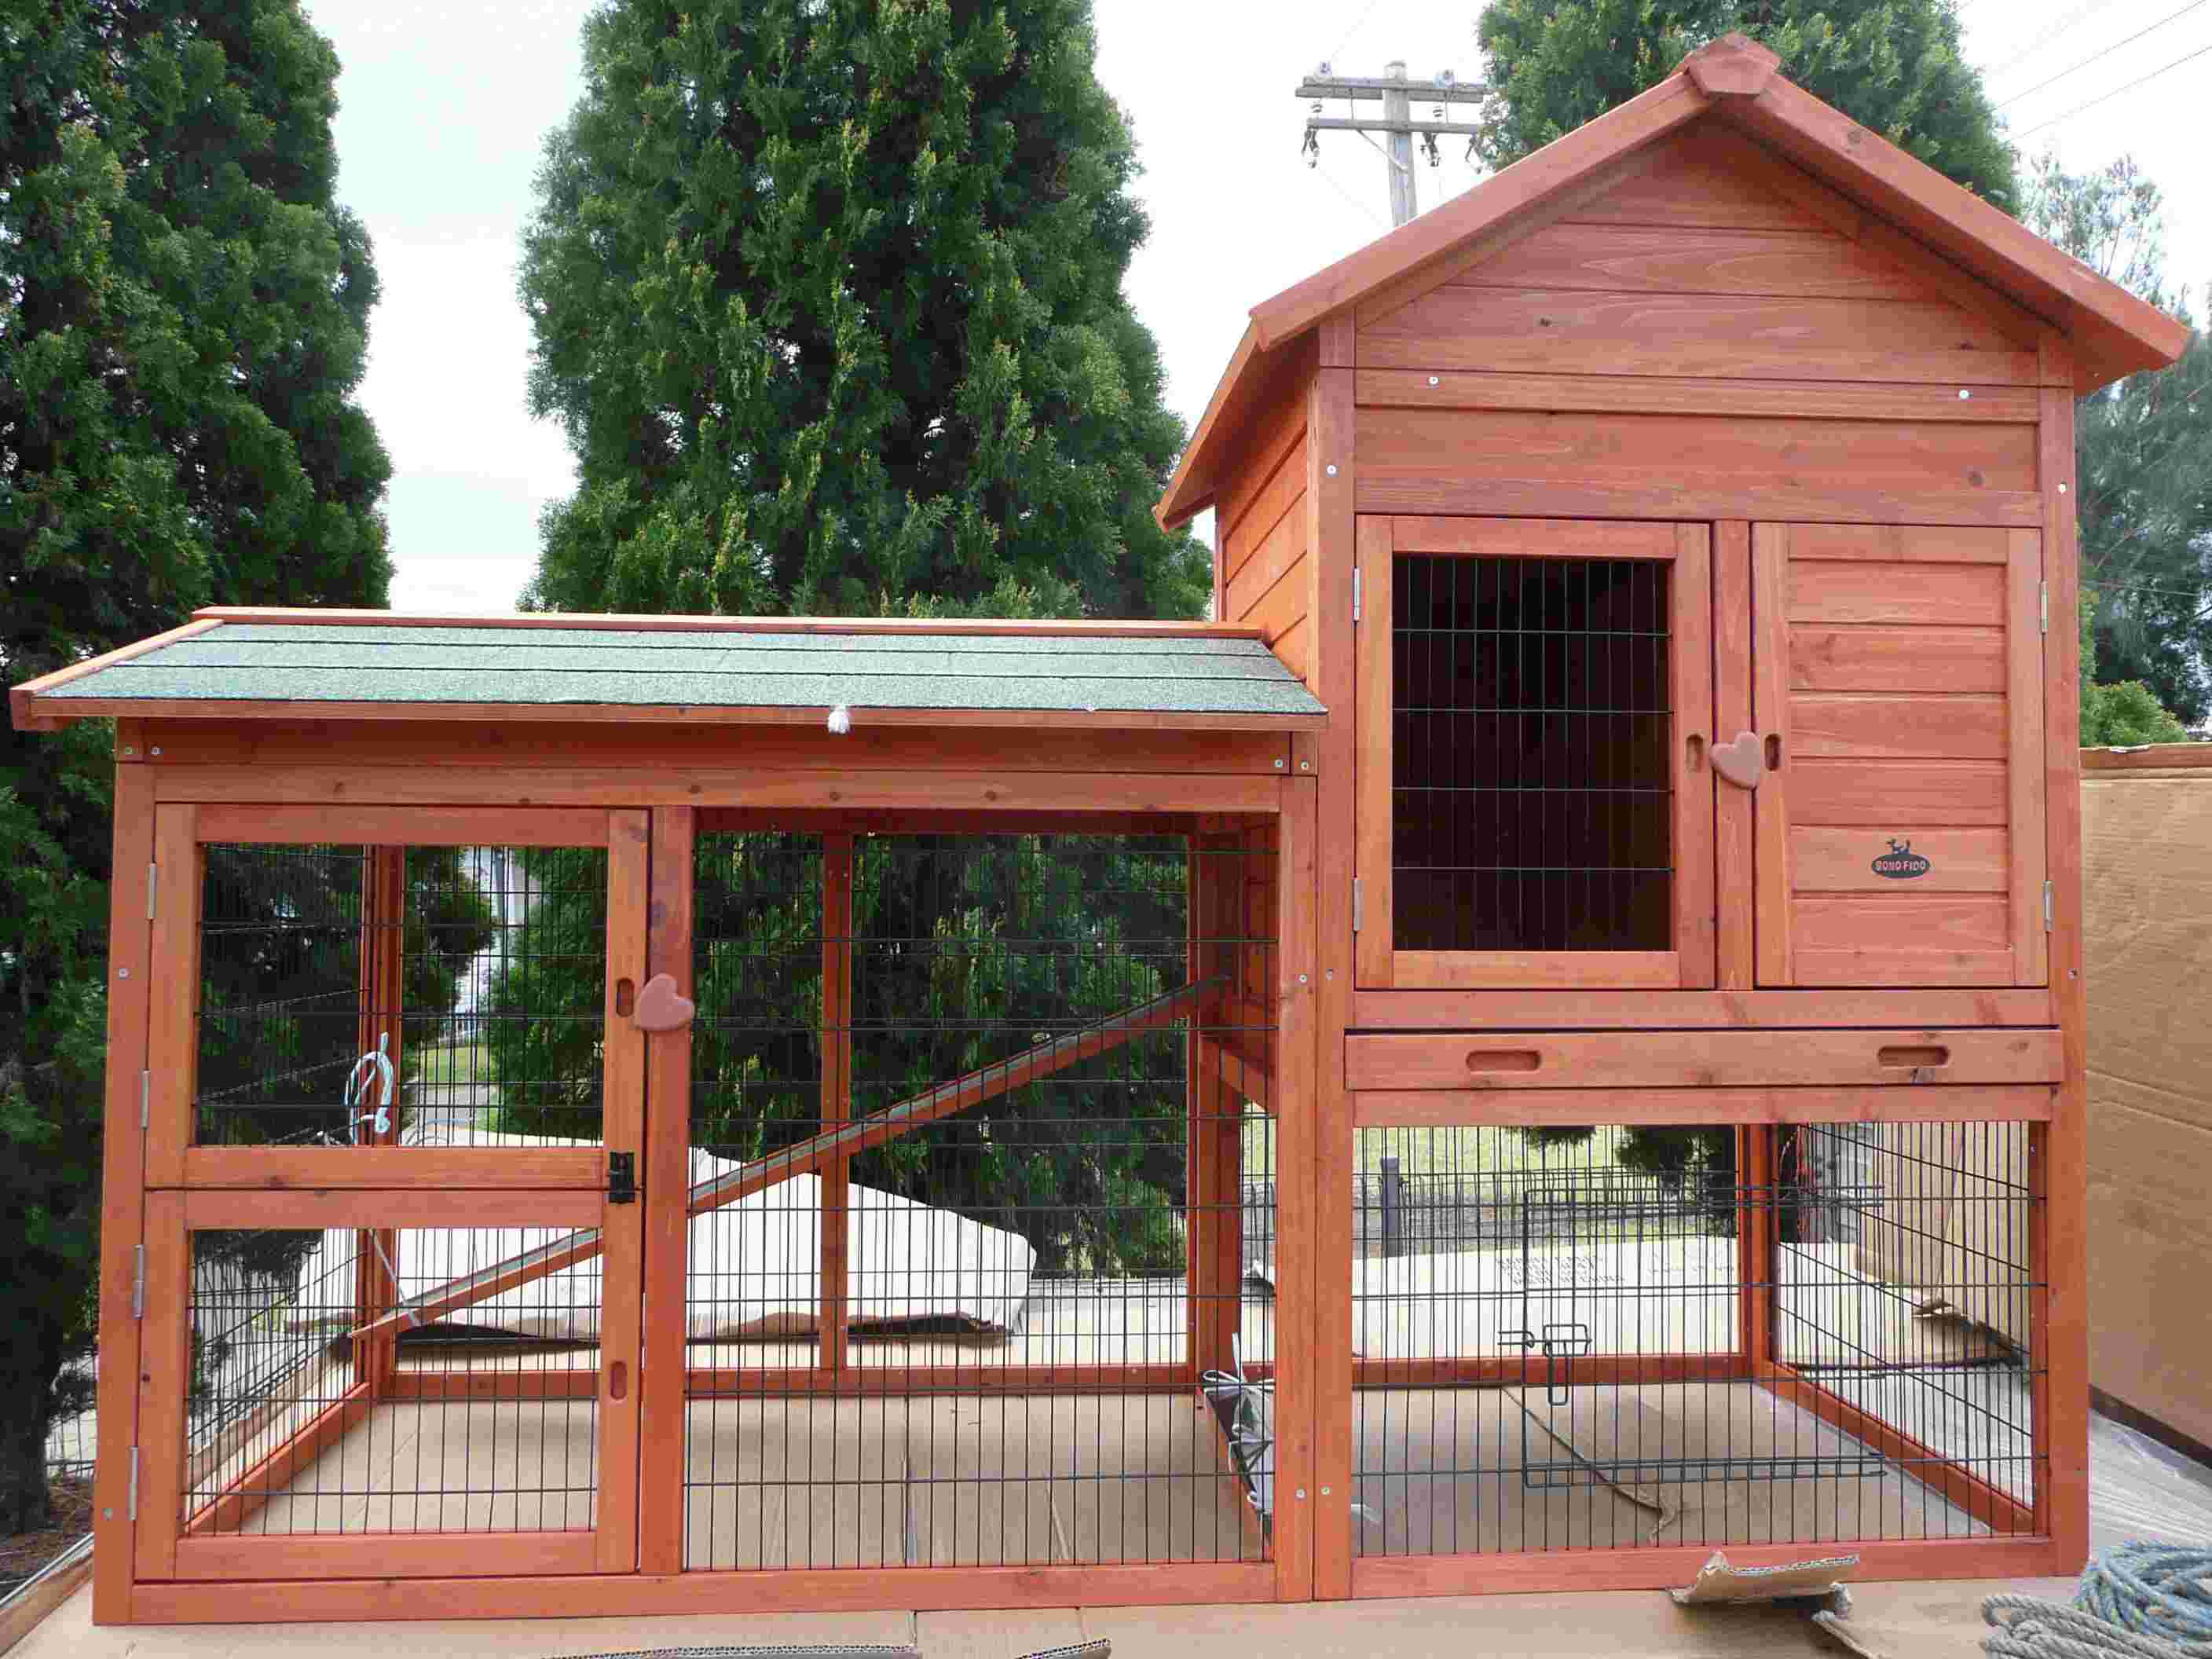 Rabbit and Rabbit Hutches | Just another WordPress.com site